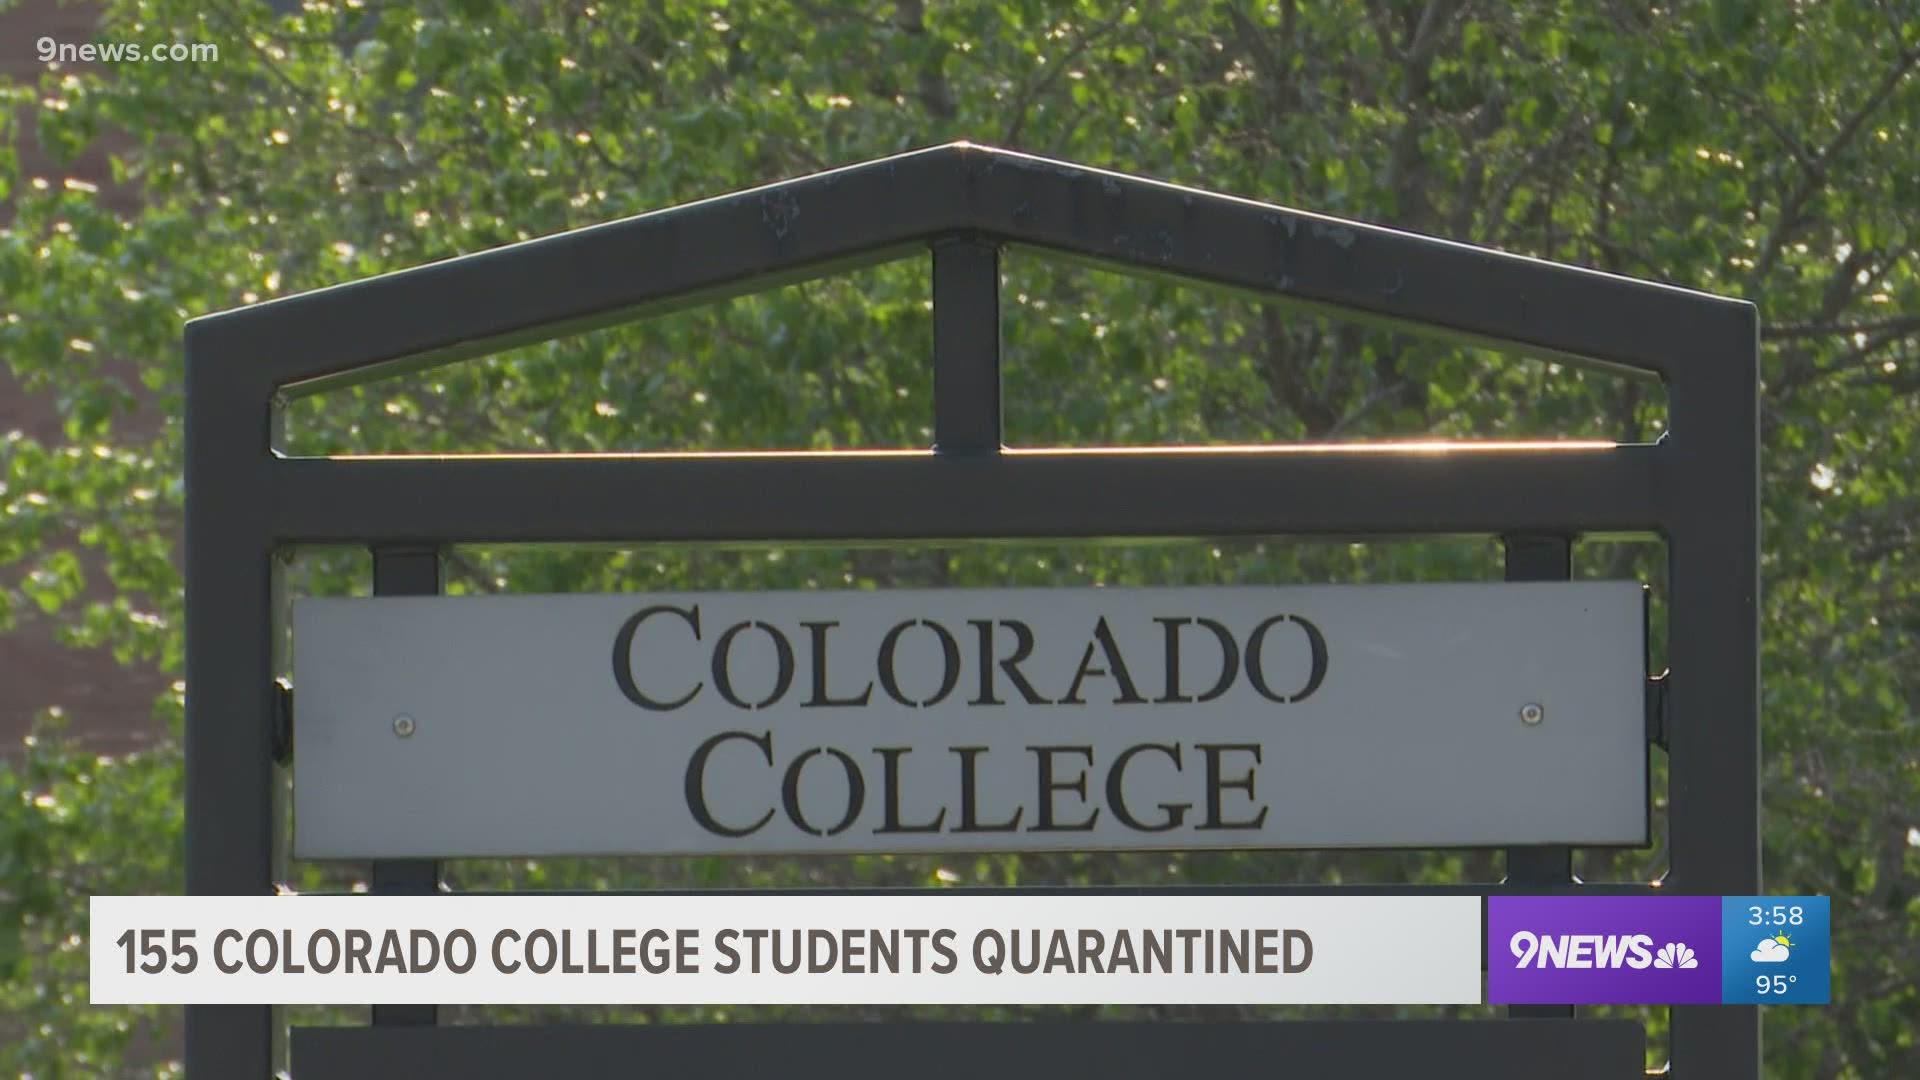 Colorado College said all incoming students are being tested when they arrive on campus, and that's how it was able to determine that one student tested positive.